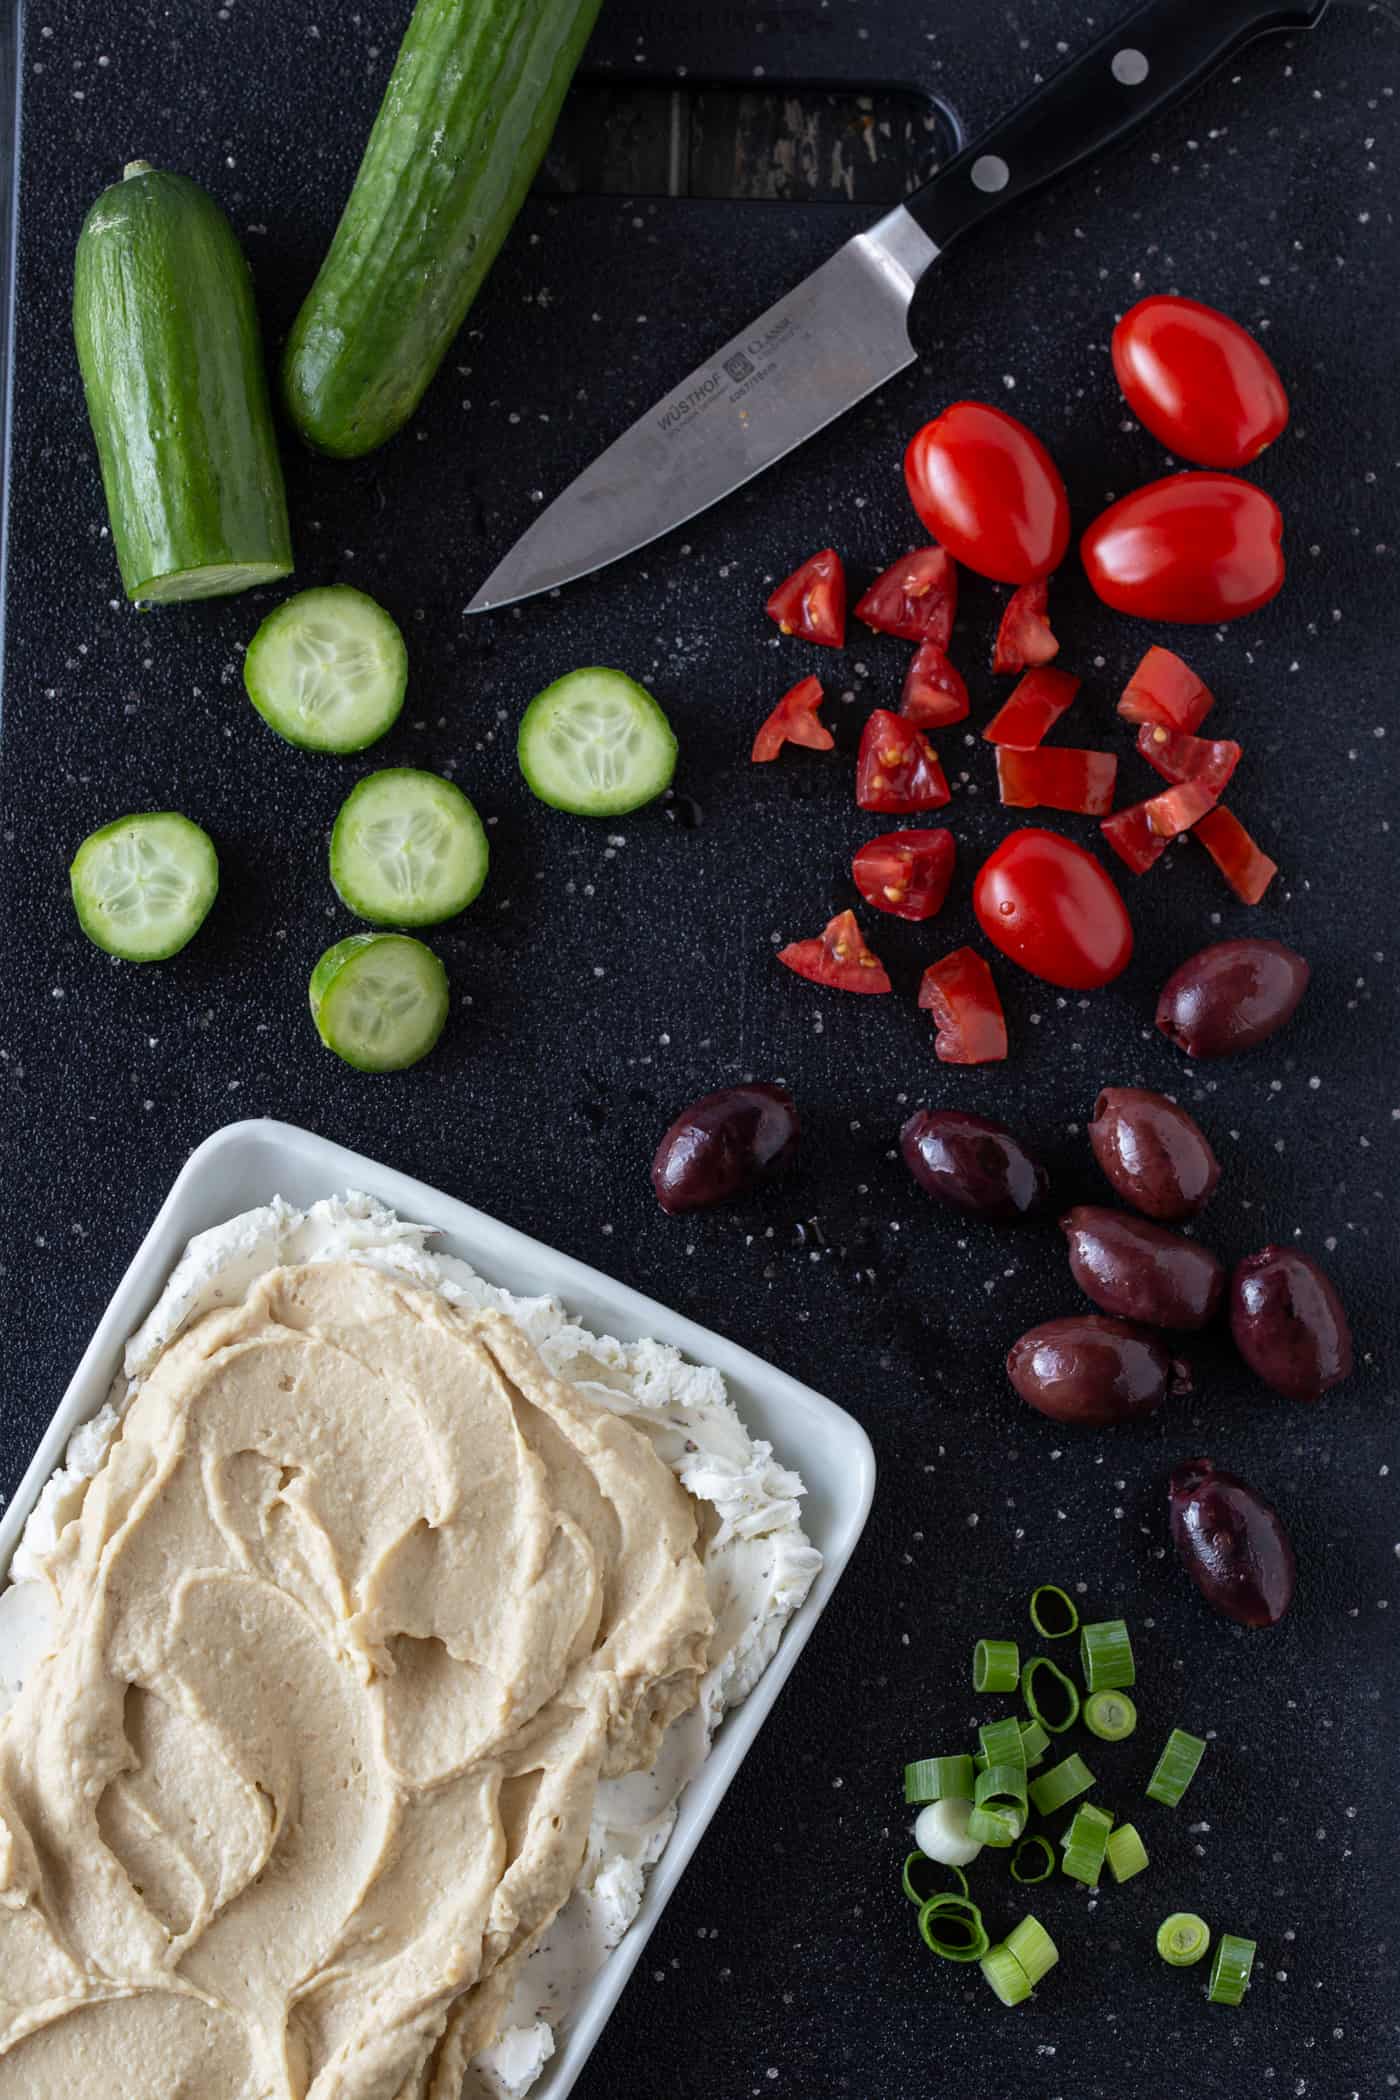 Greek Dip ingredients including olives, cucumbers and tomatoes.